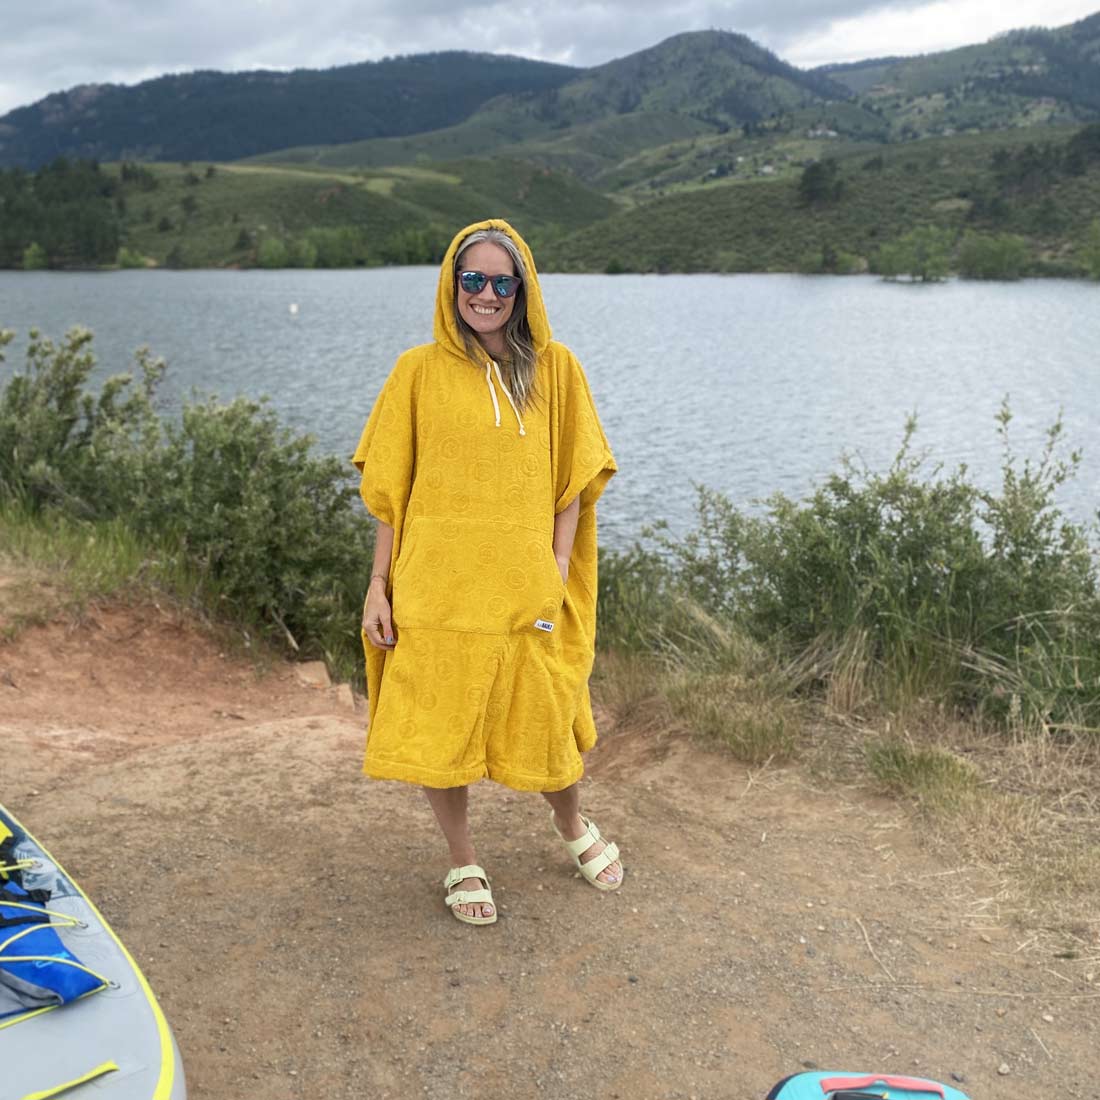 sunshine-smiley-face-yellow-changing-poncho.jpg